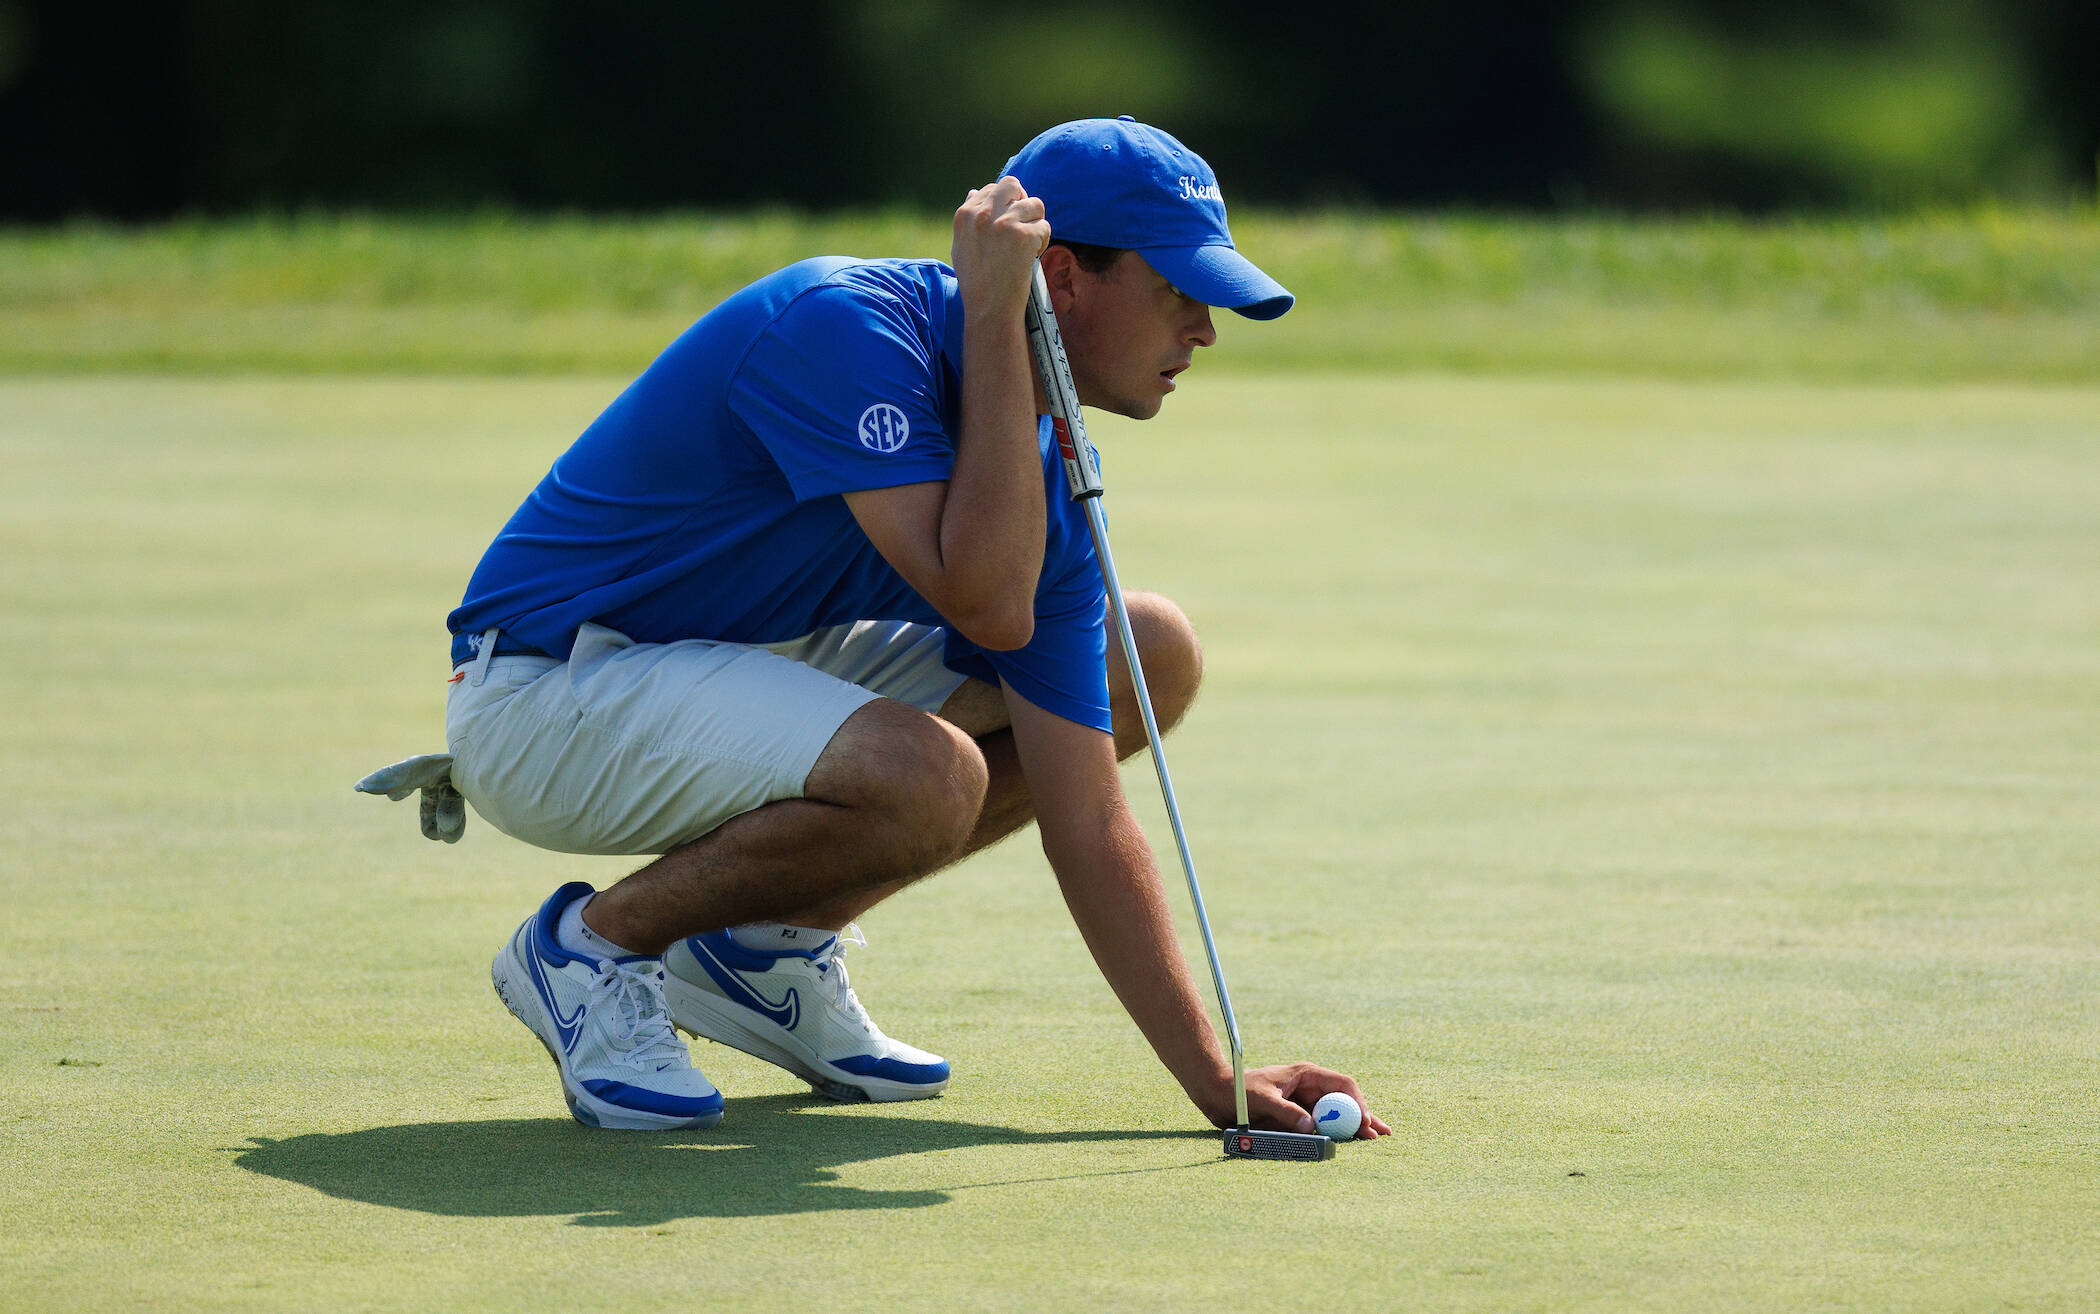 Cats Sit Third Late in Second Round of Battle at Briar’s Creek